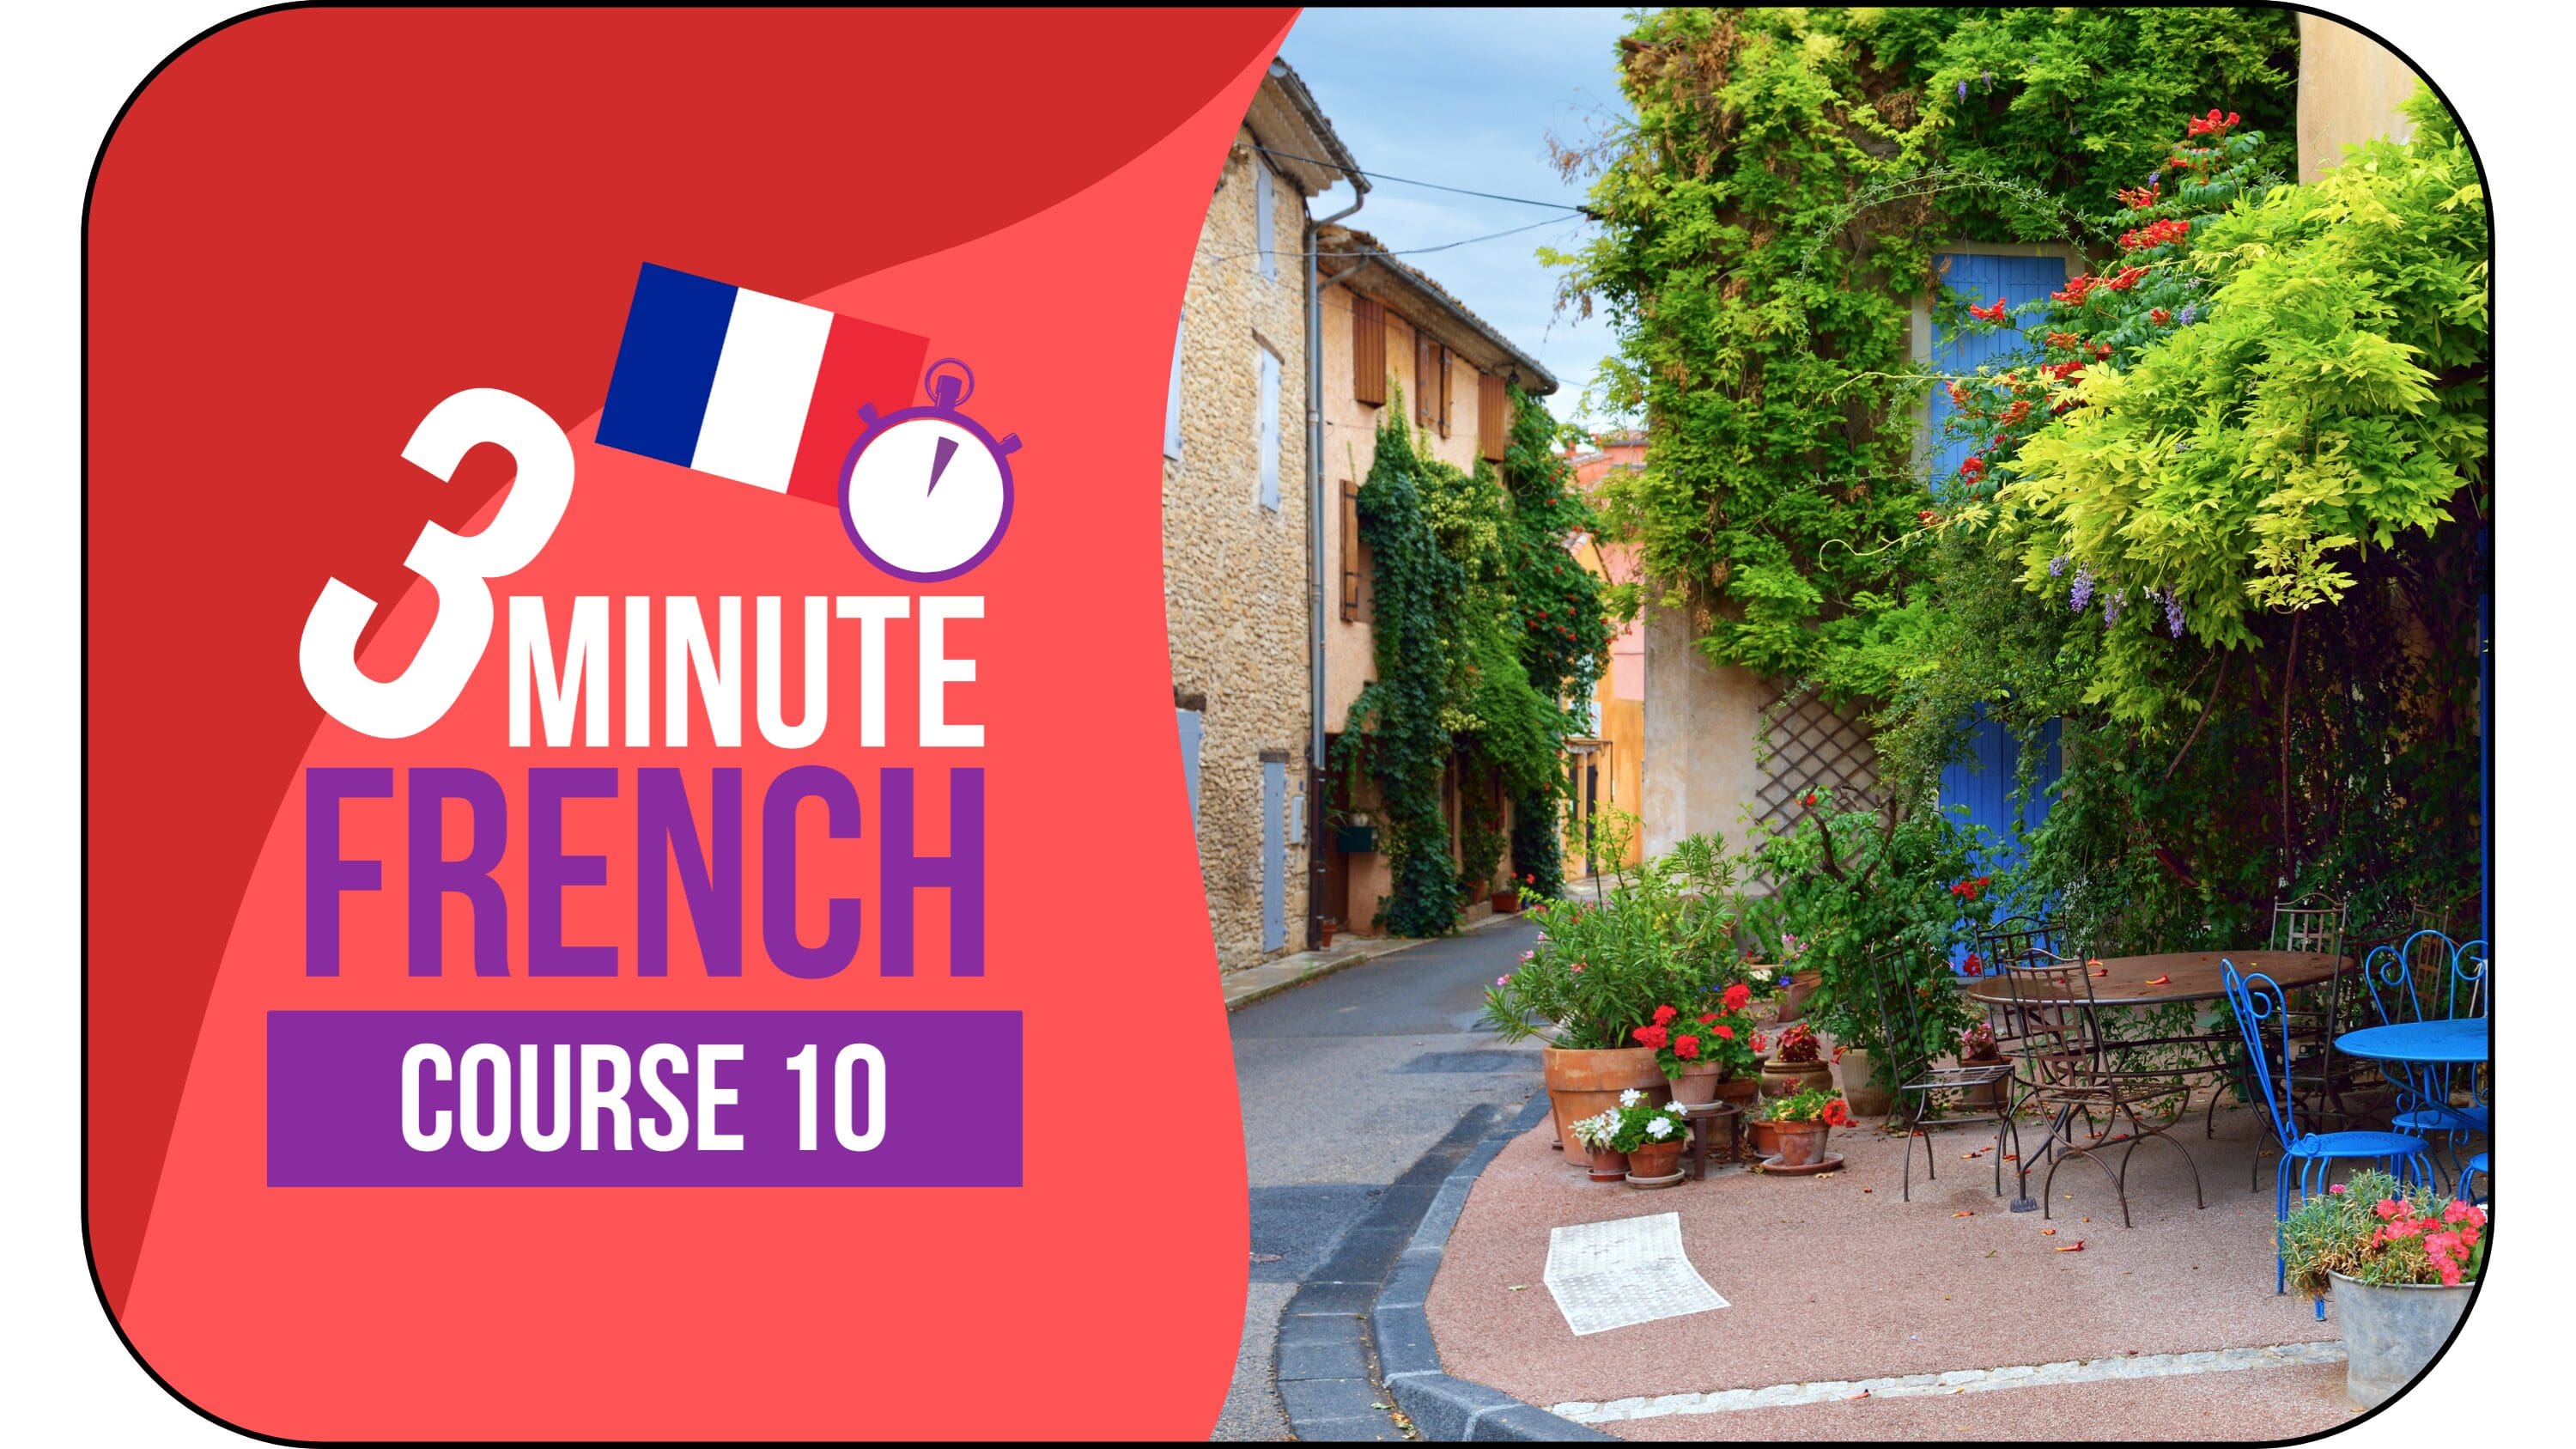 3 Minute French - Course 10